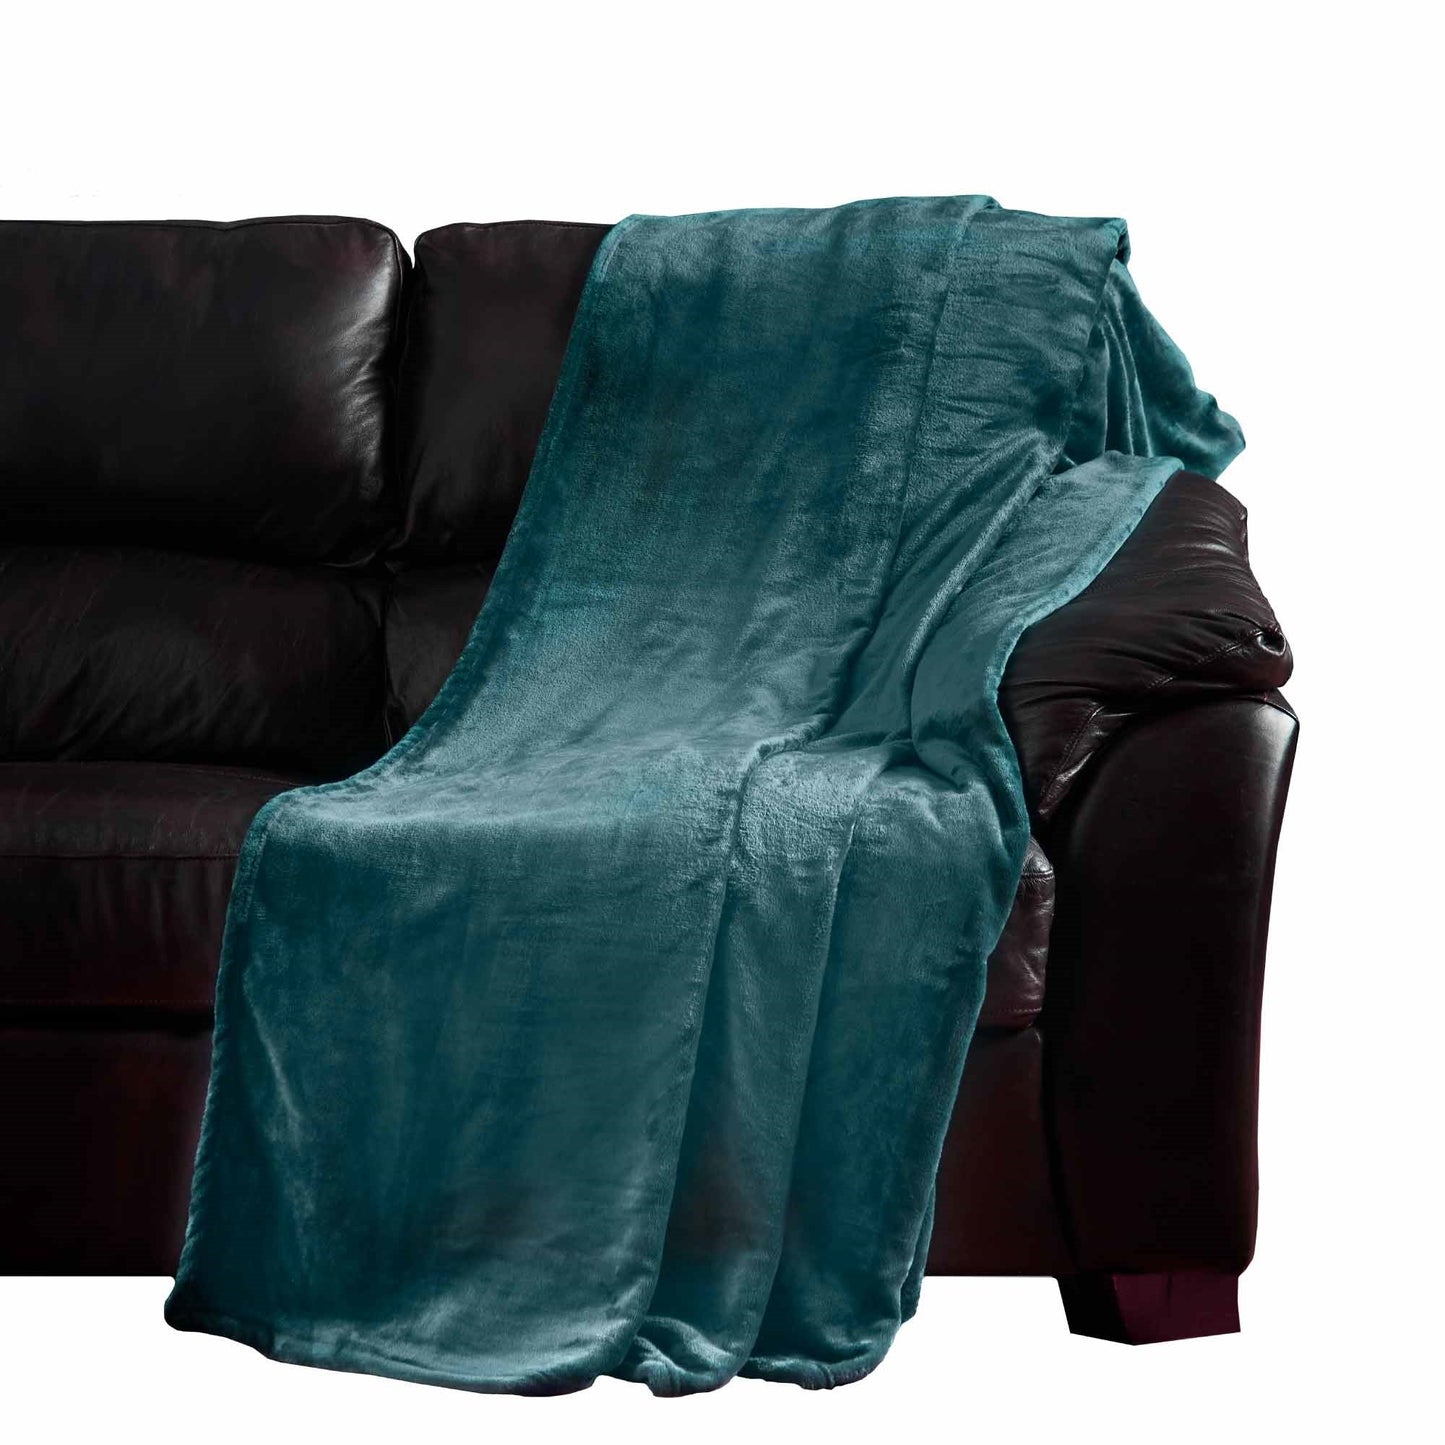 Super Soft Flannel Throw - Teal